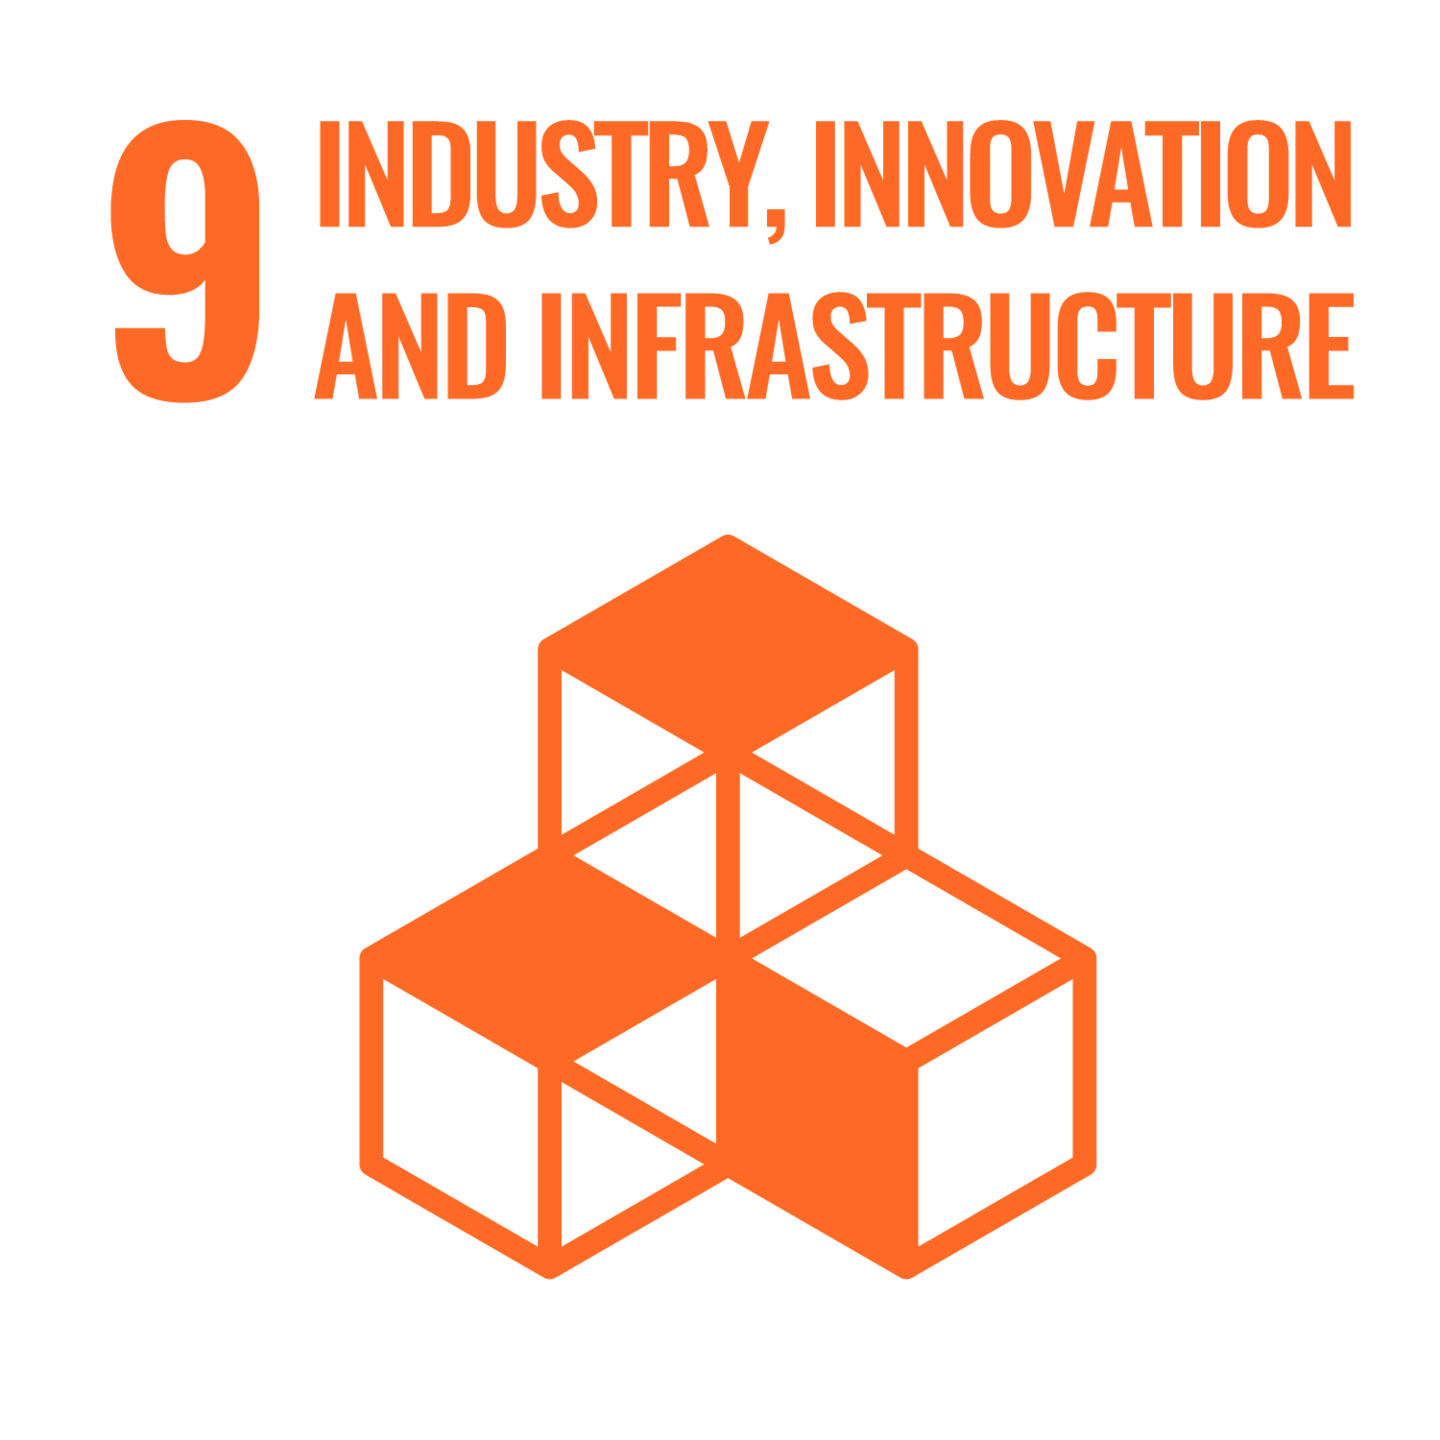 UN Sustainable Development Goal 9: Industry, Innovation and Infrastructure